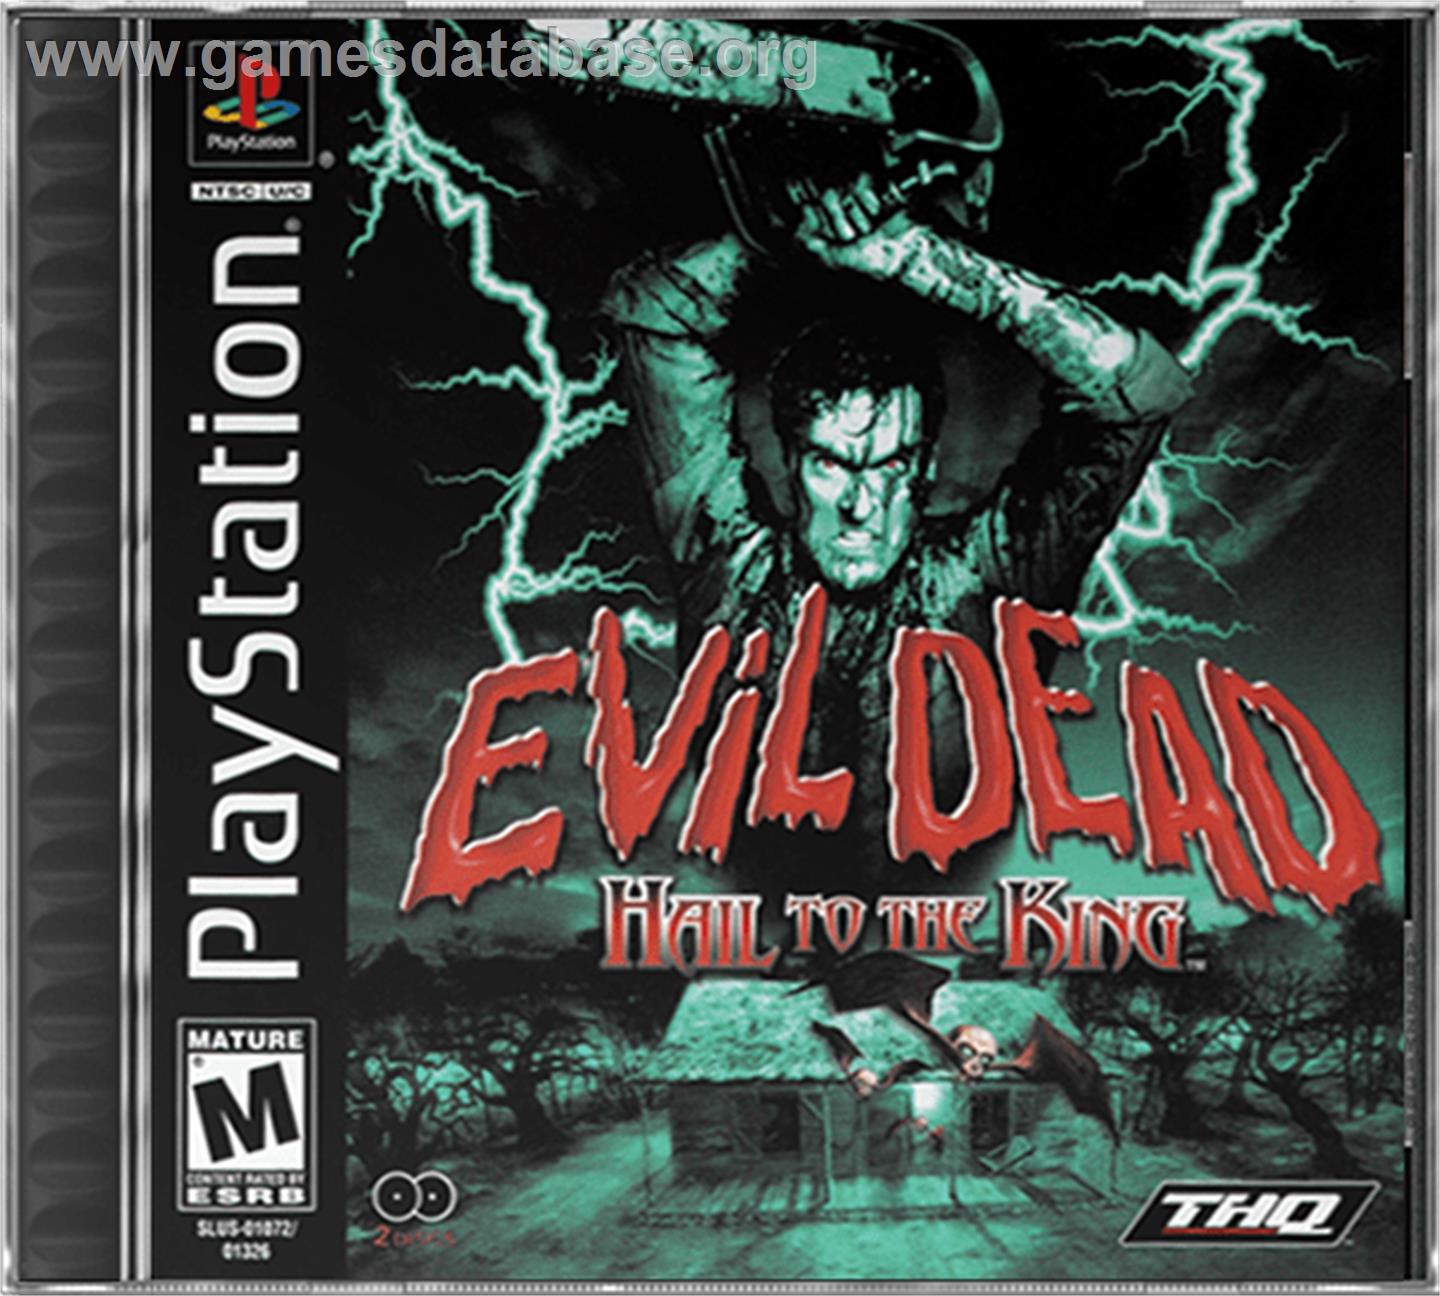 Evil Dead: Hail to the King - Sony Playstation - Artwork - Box